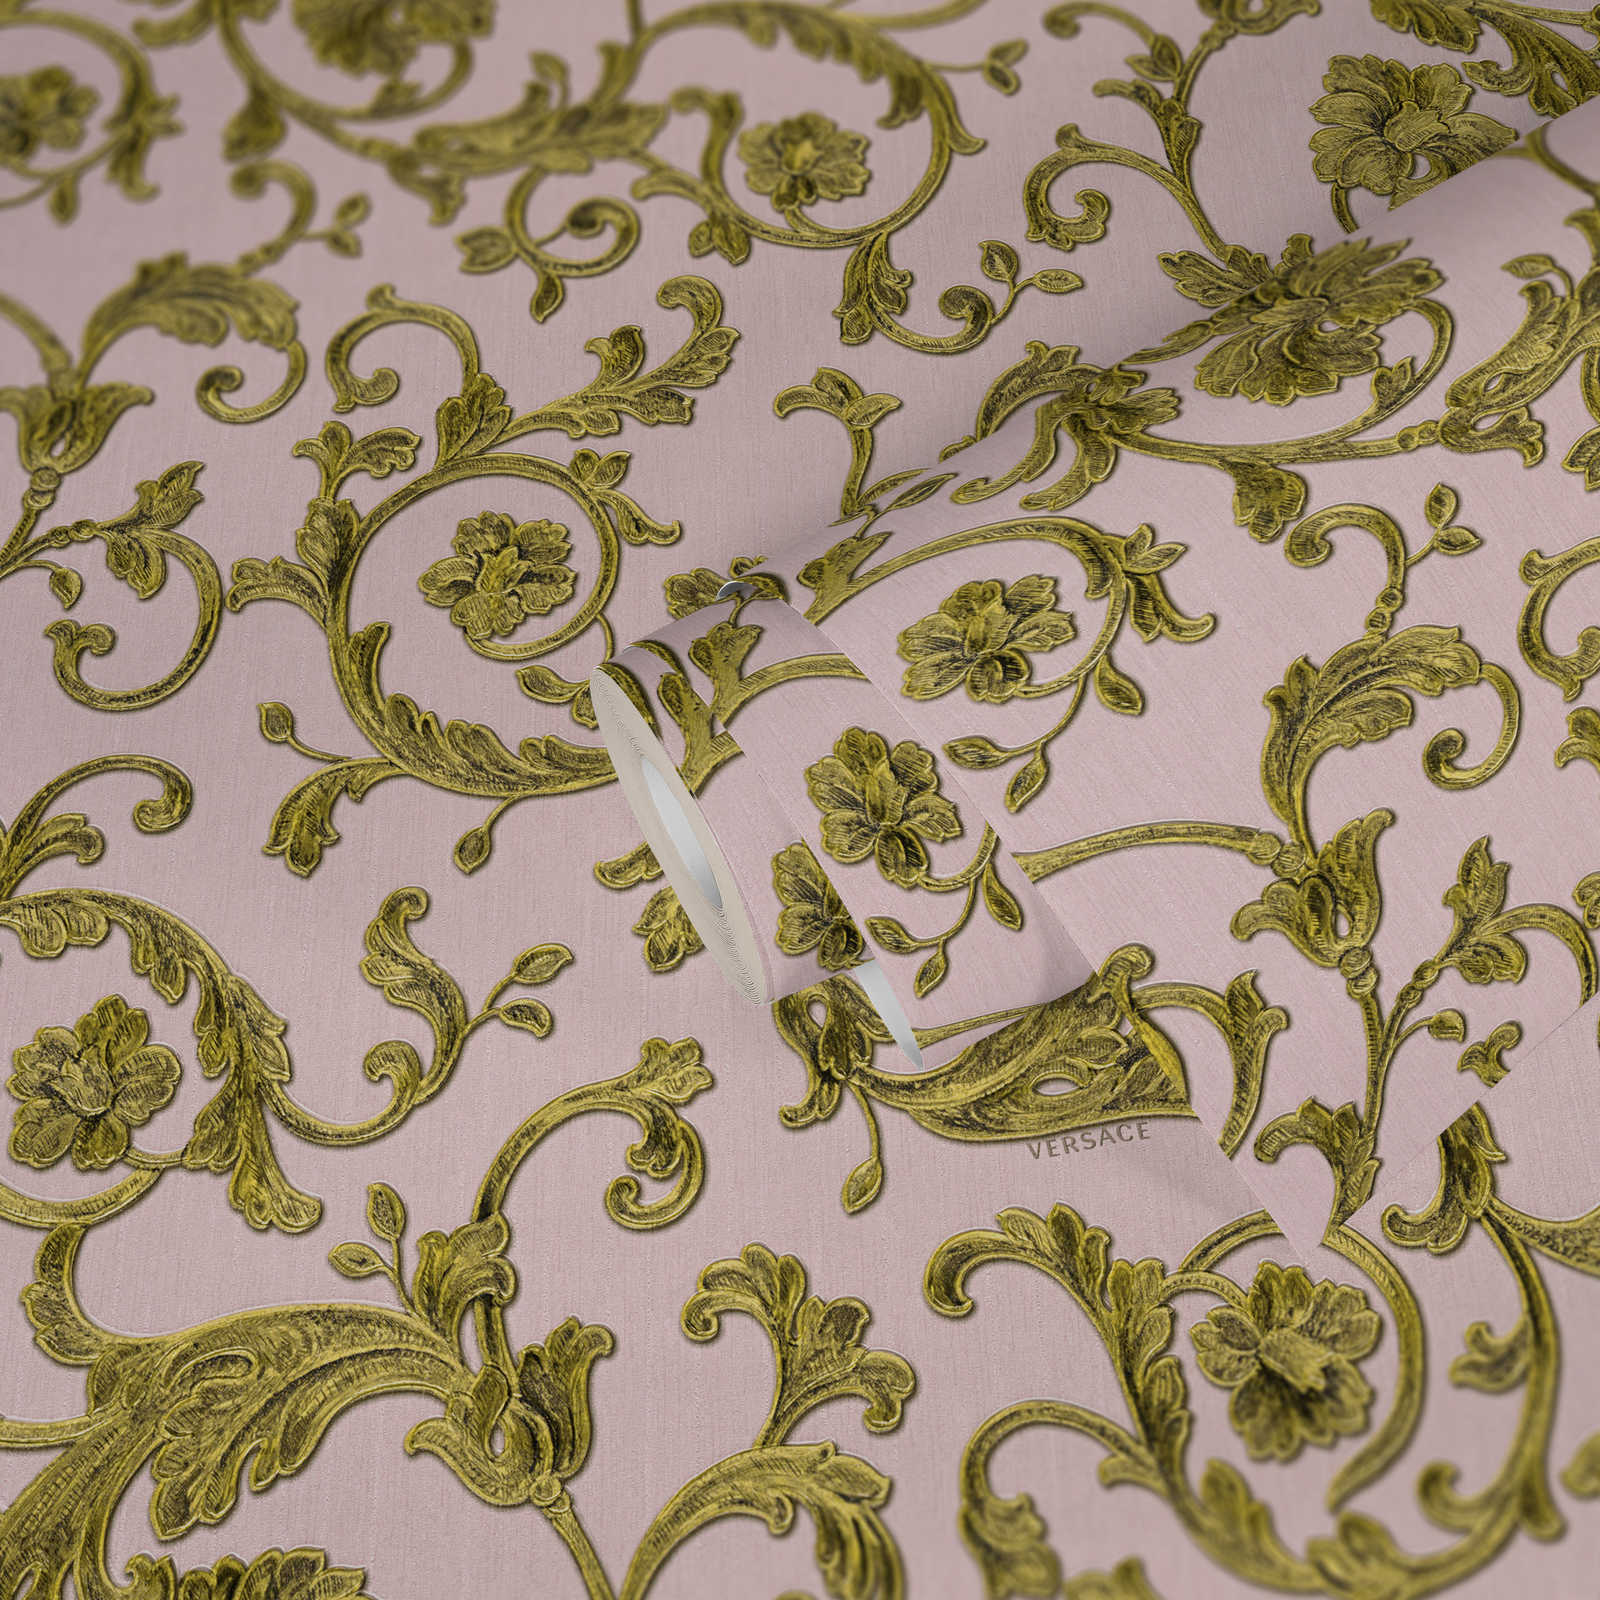             VERSACE wallpaper old gold ornaments floral - pink
        